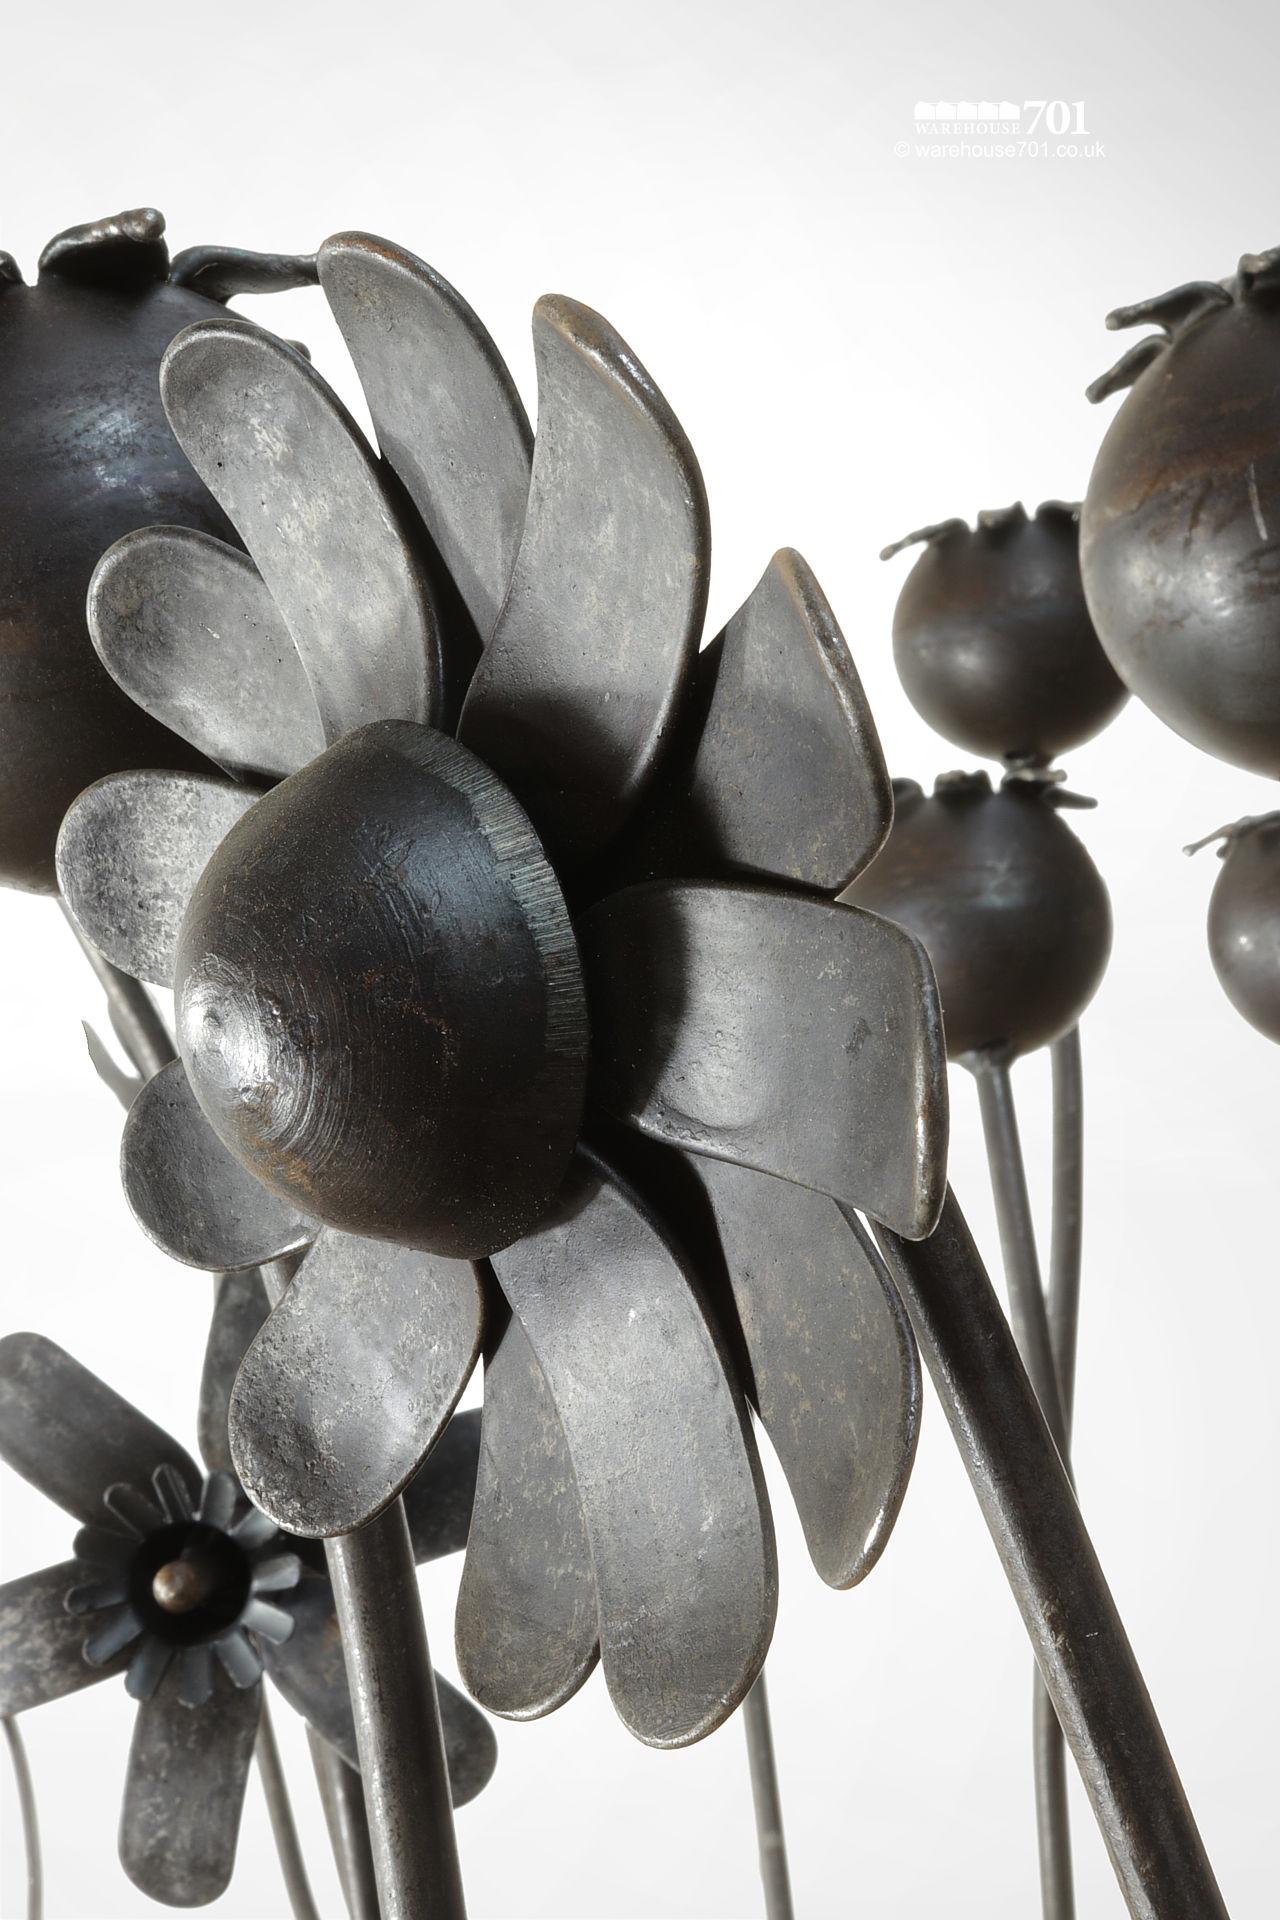 NEW Full Sized Sculptured Hand Made Metal Flowers and Fungi #6